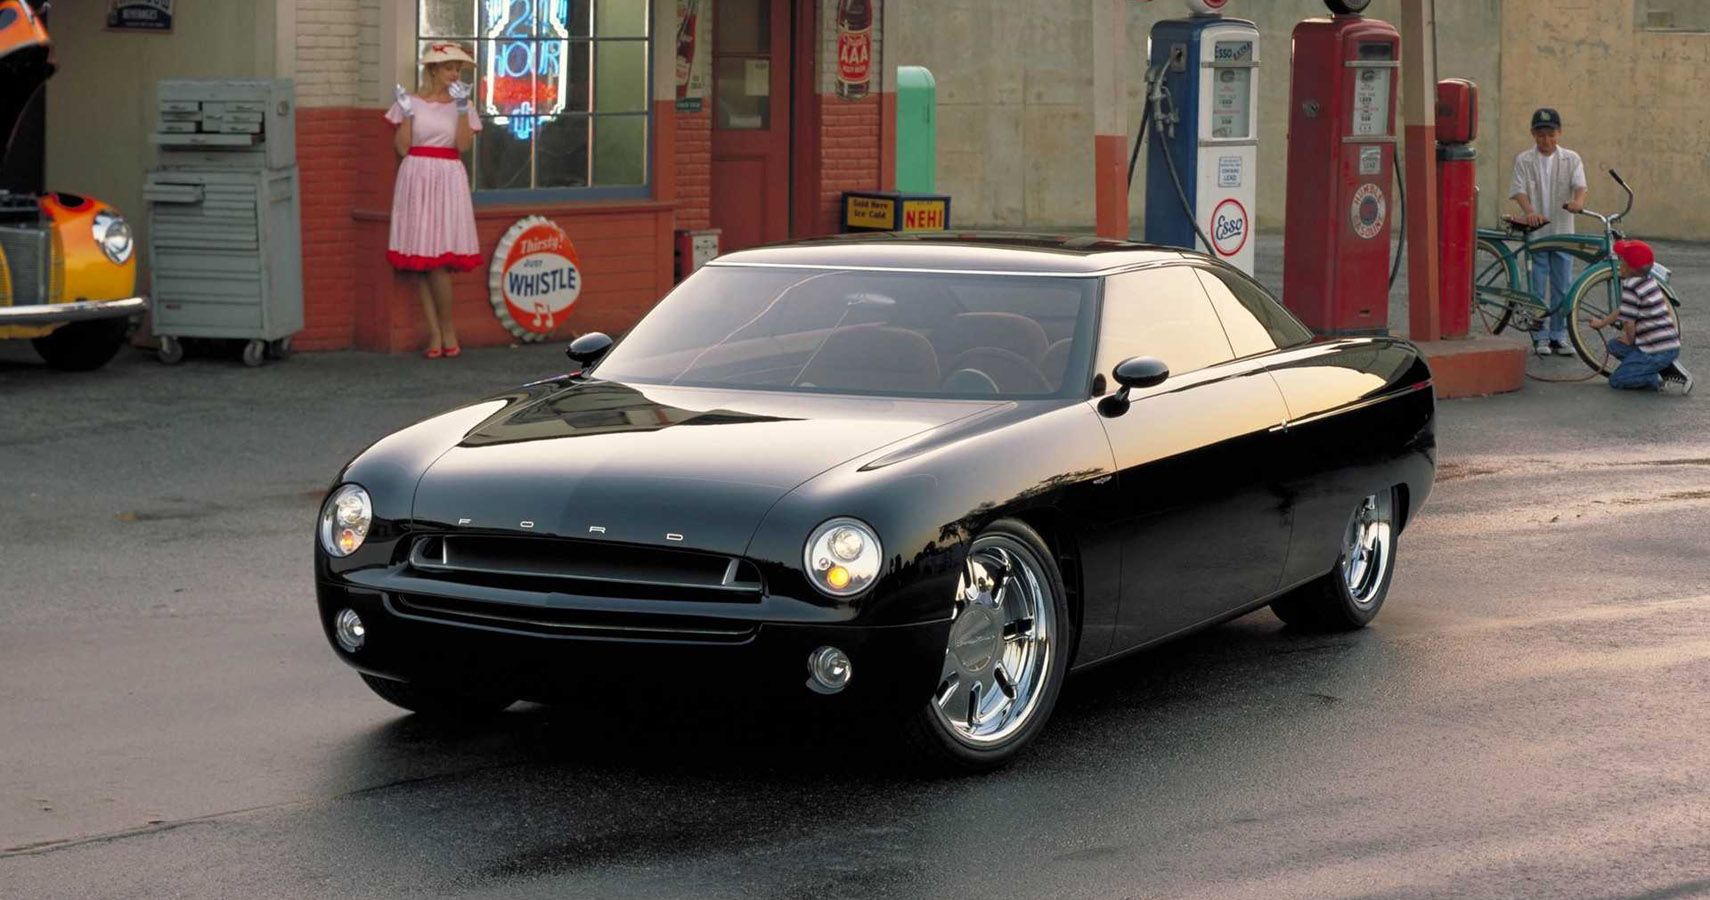 8 Most Badass Muscle Car Concepts Companies Ever Designed